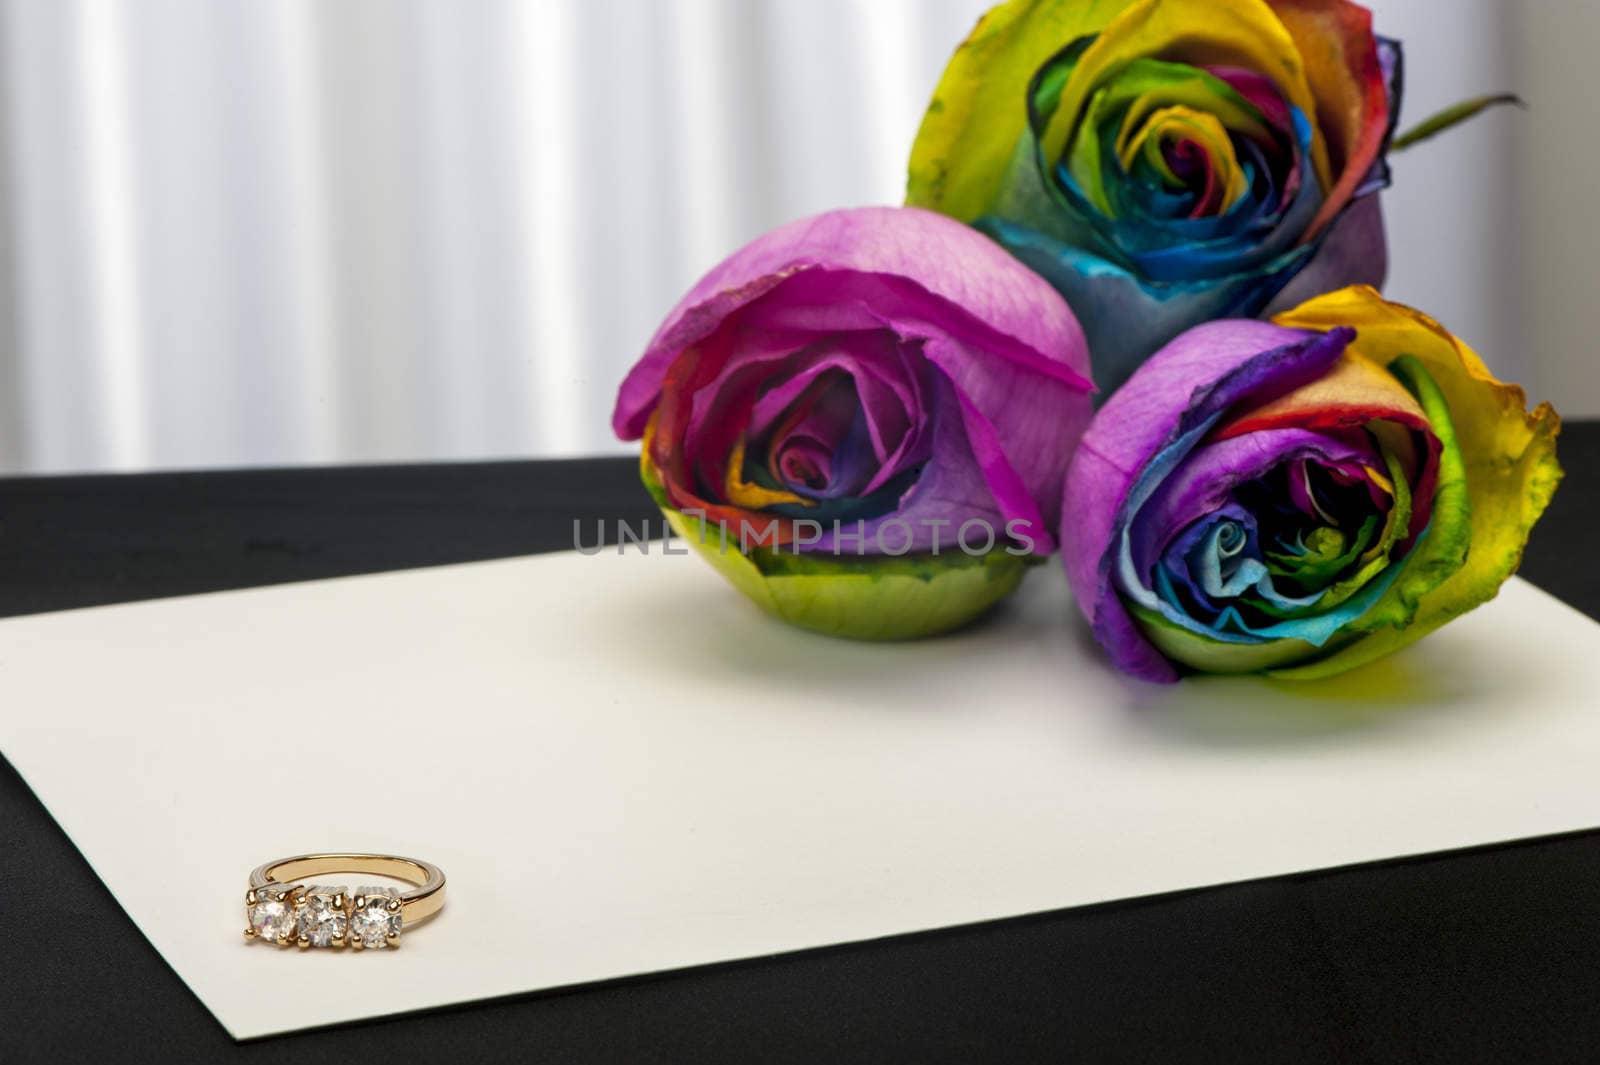 a  roses and wedding rings on white background